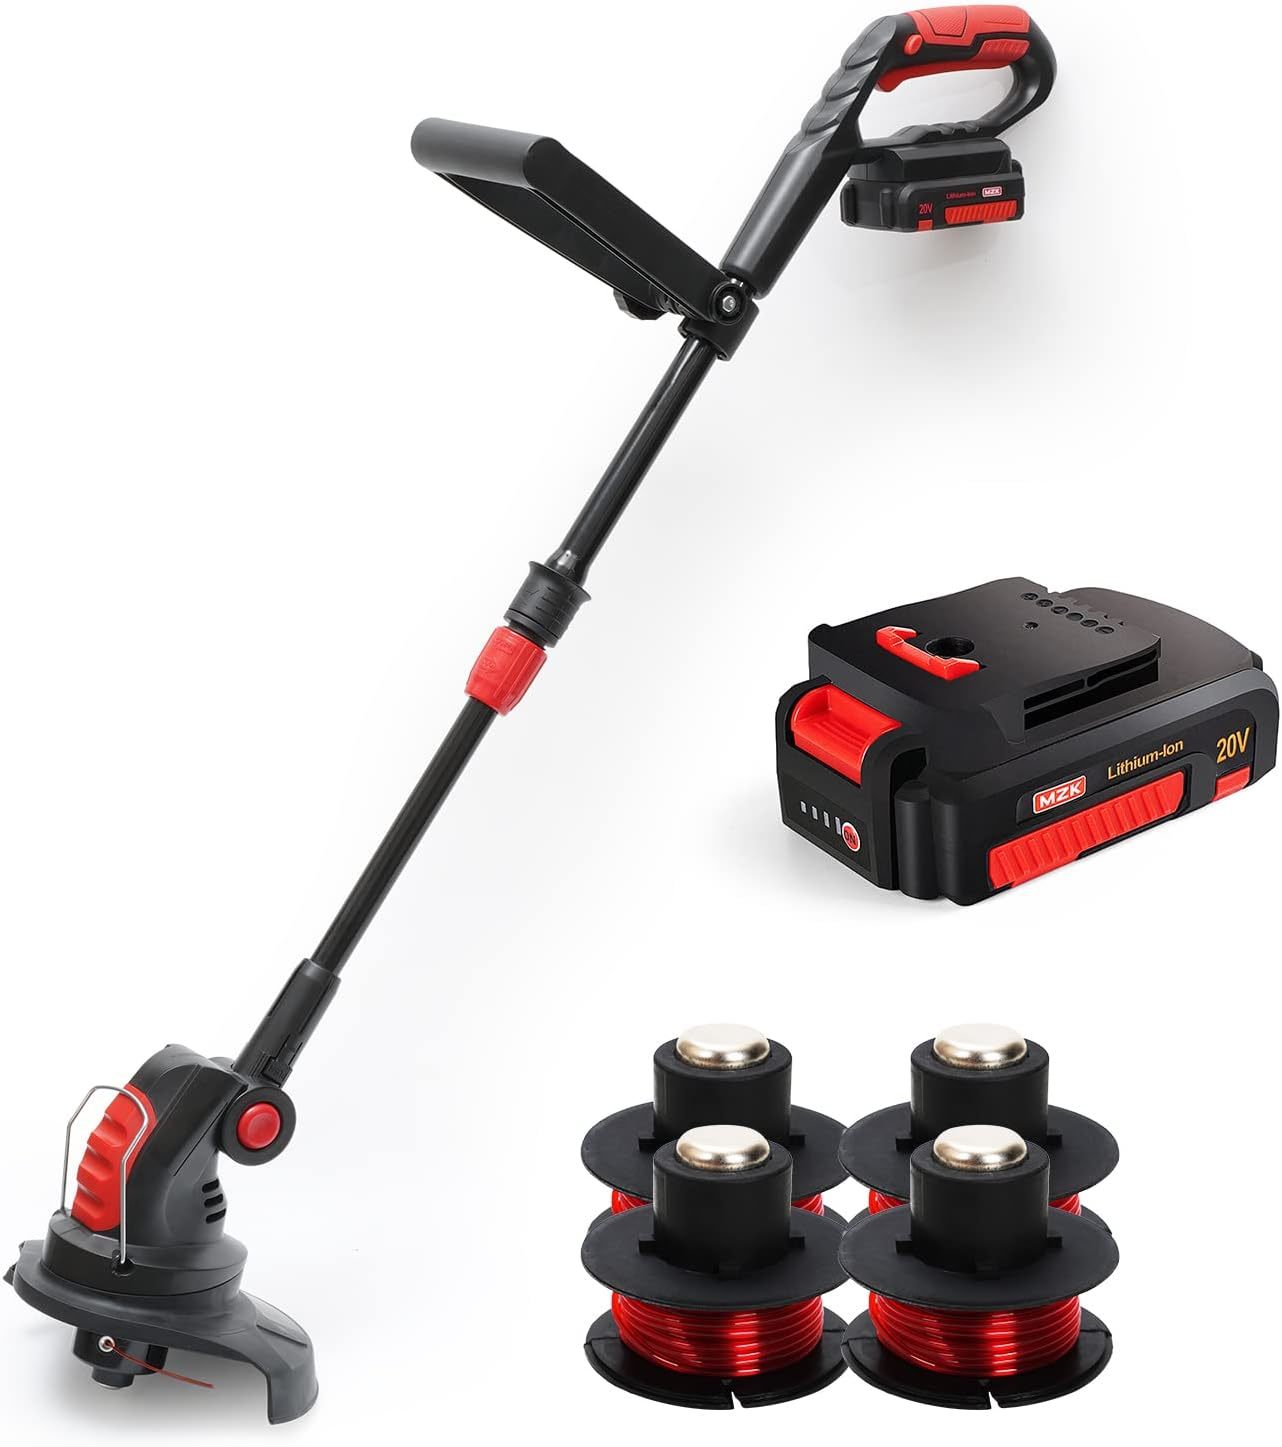 Mzk 20V Cordless Electric 12 Inch Weed Eater, 2.0Ah Battery And Charger, 8000 - $90.99